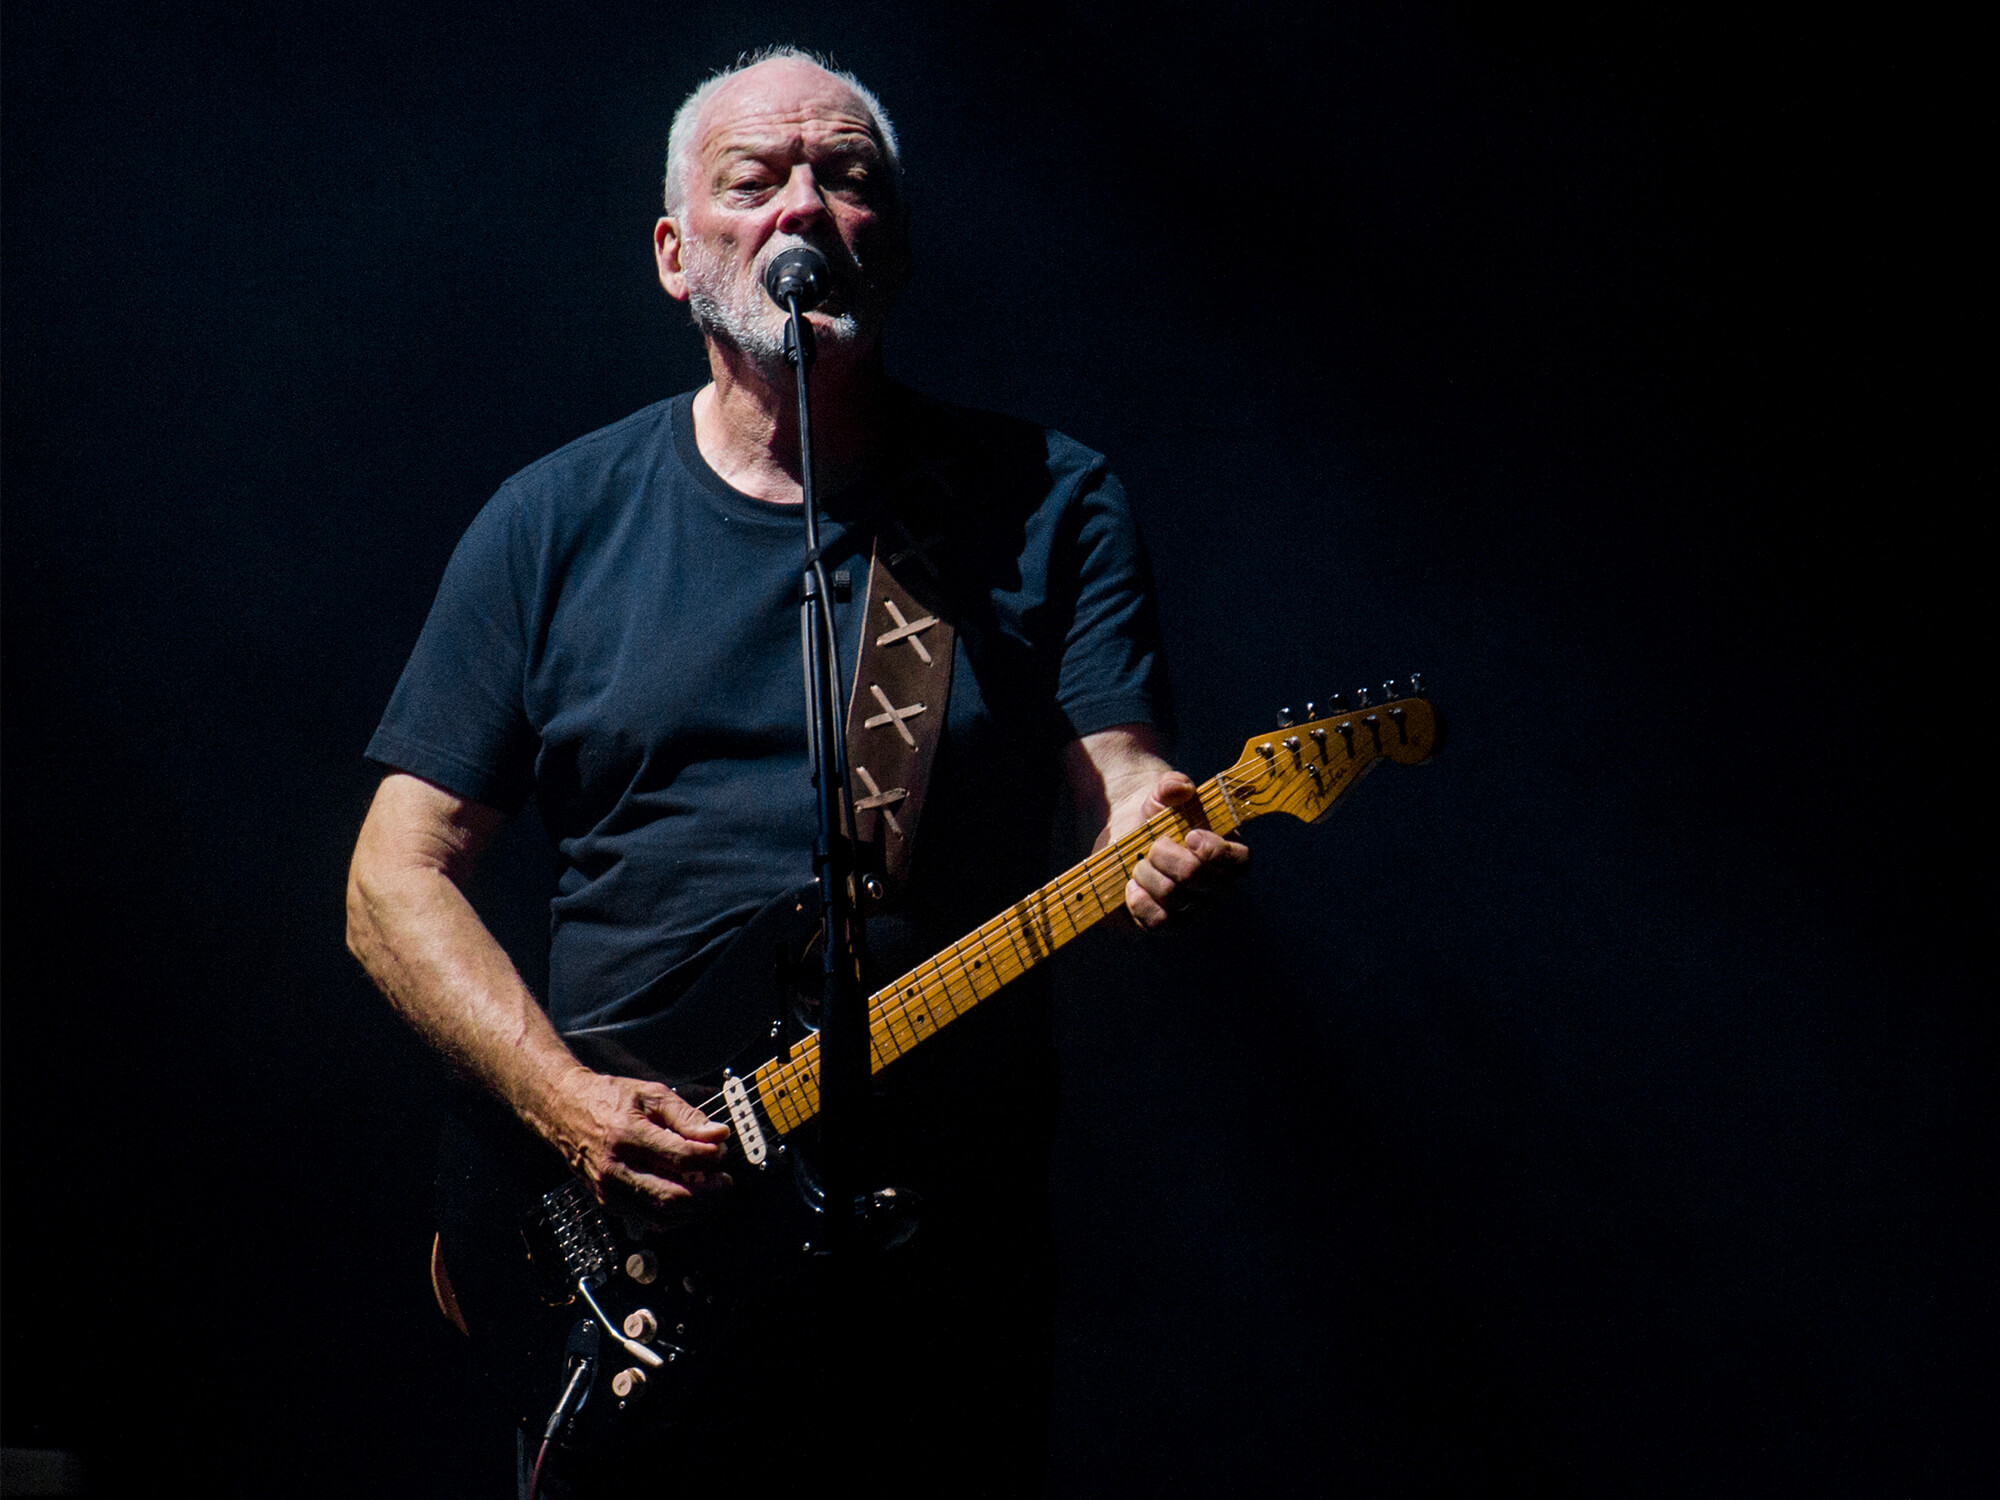 David Gilmour in concert with guitar